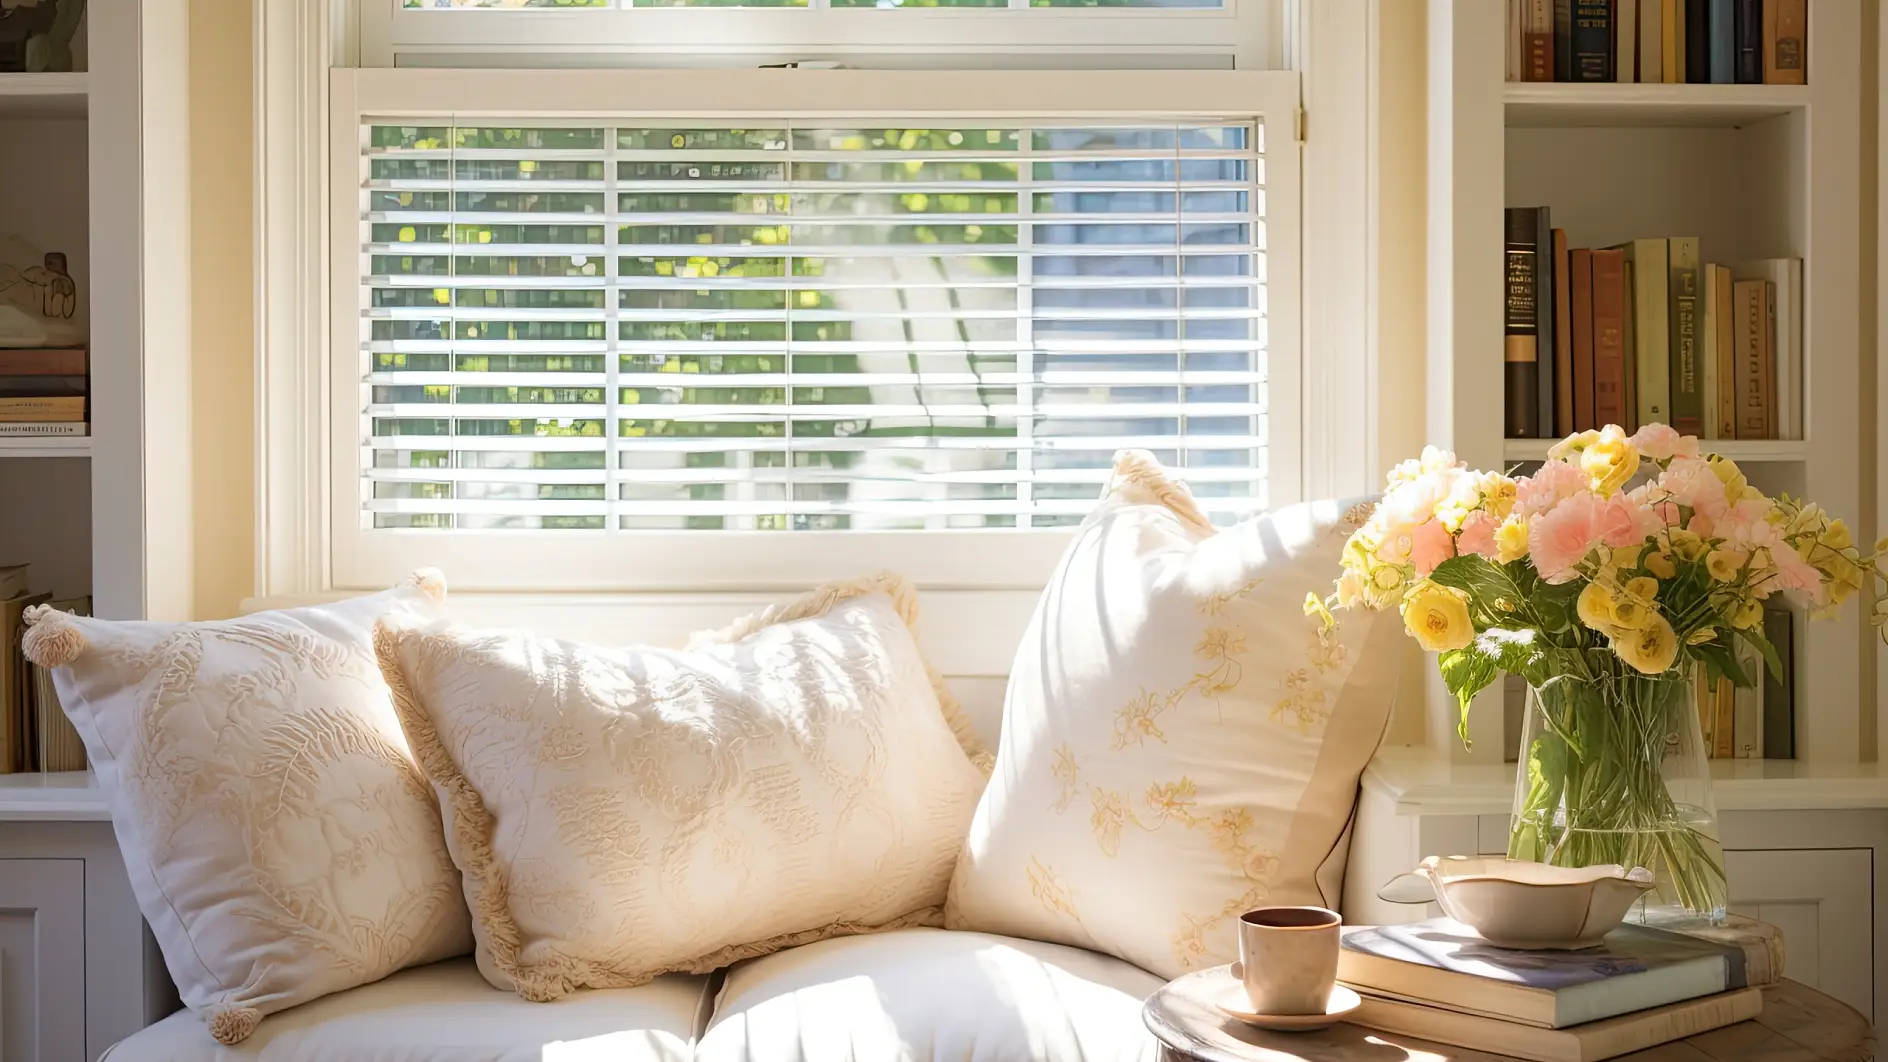 A comfortable and inviting window nook with plush cushions and a book spread open, sunlight streaming in through old-fashioned shutters, showcasing a charming and classic interior design.